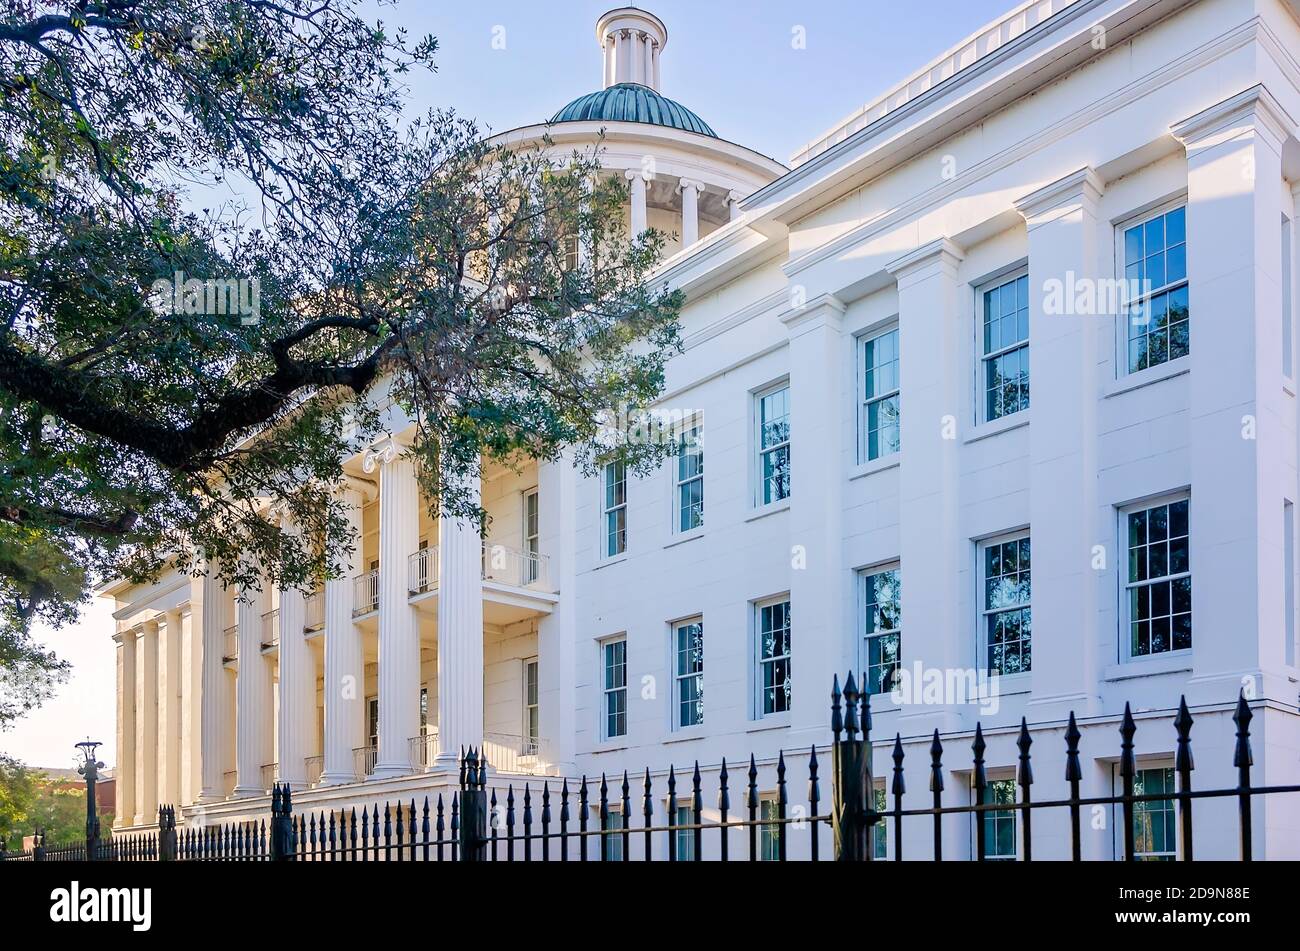 Barton Academy, the first public school in Alabama, is pictured, Oct. 31, 2020, in Mobile, Alabama. Stock Photo